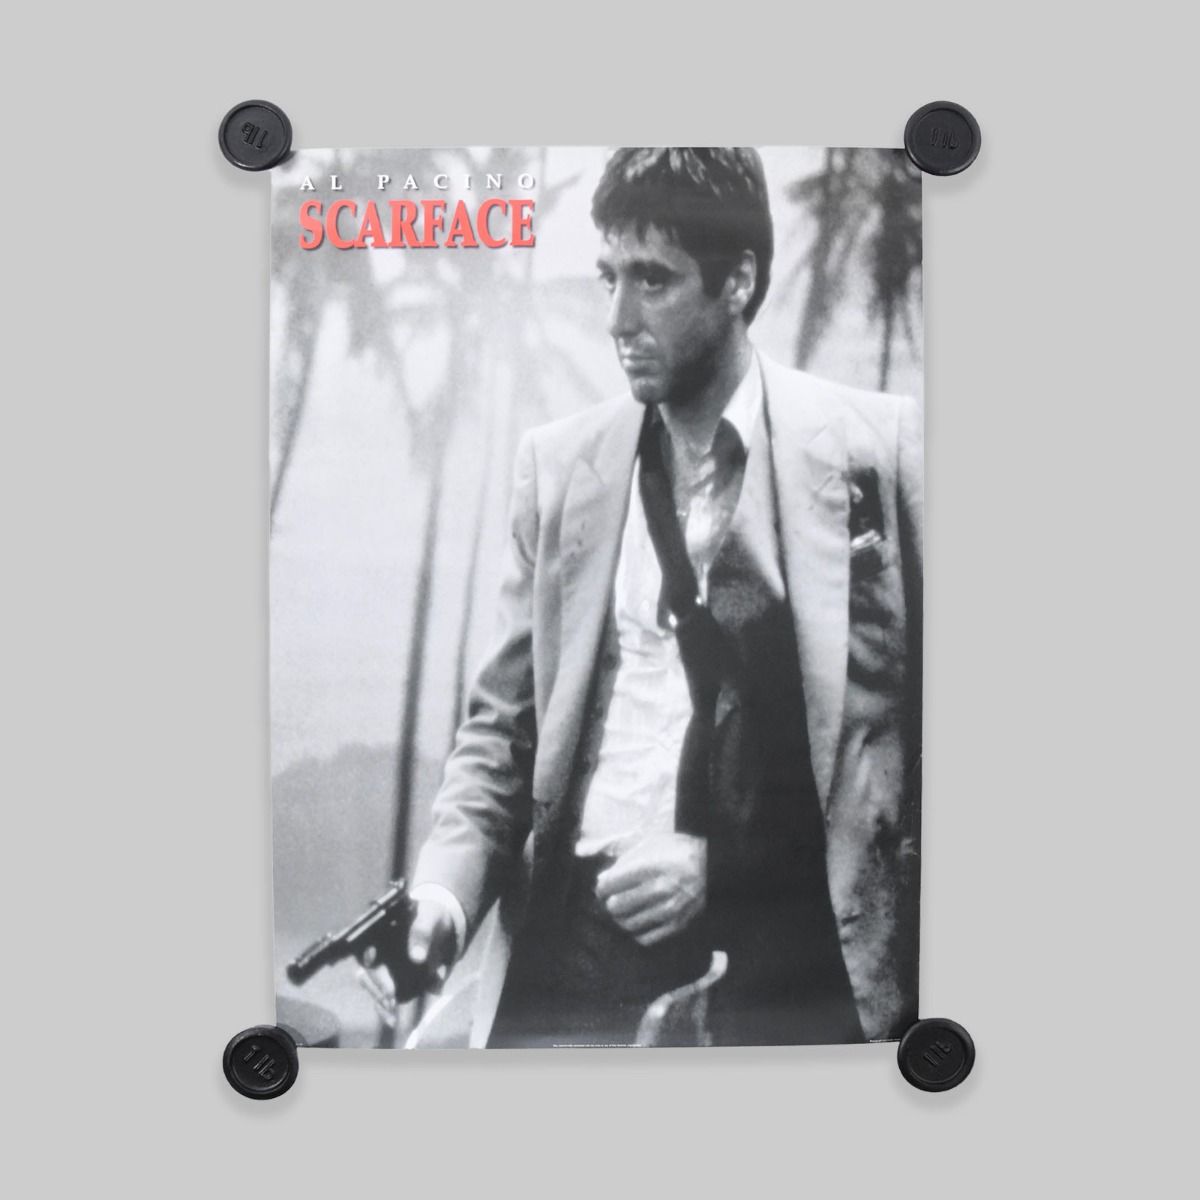 Scarface Poster A1